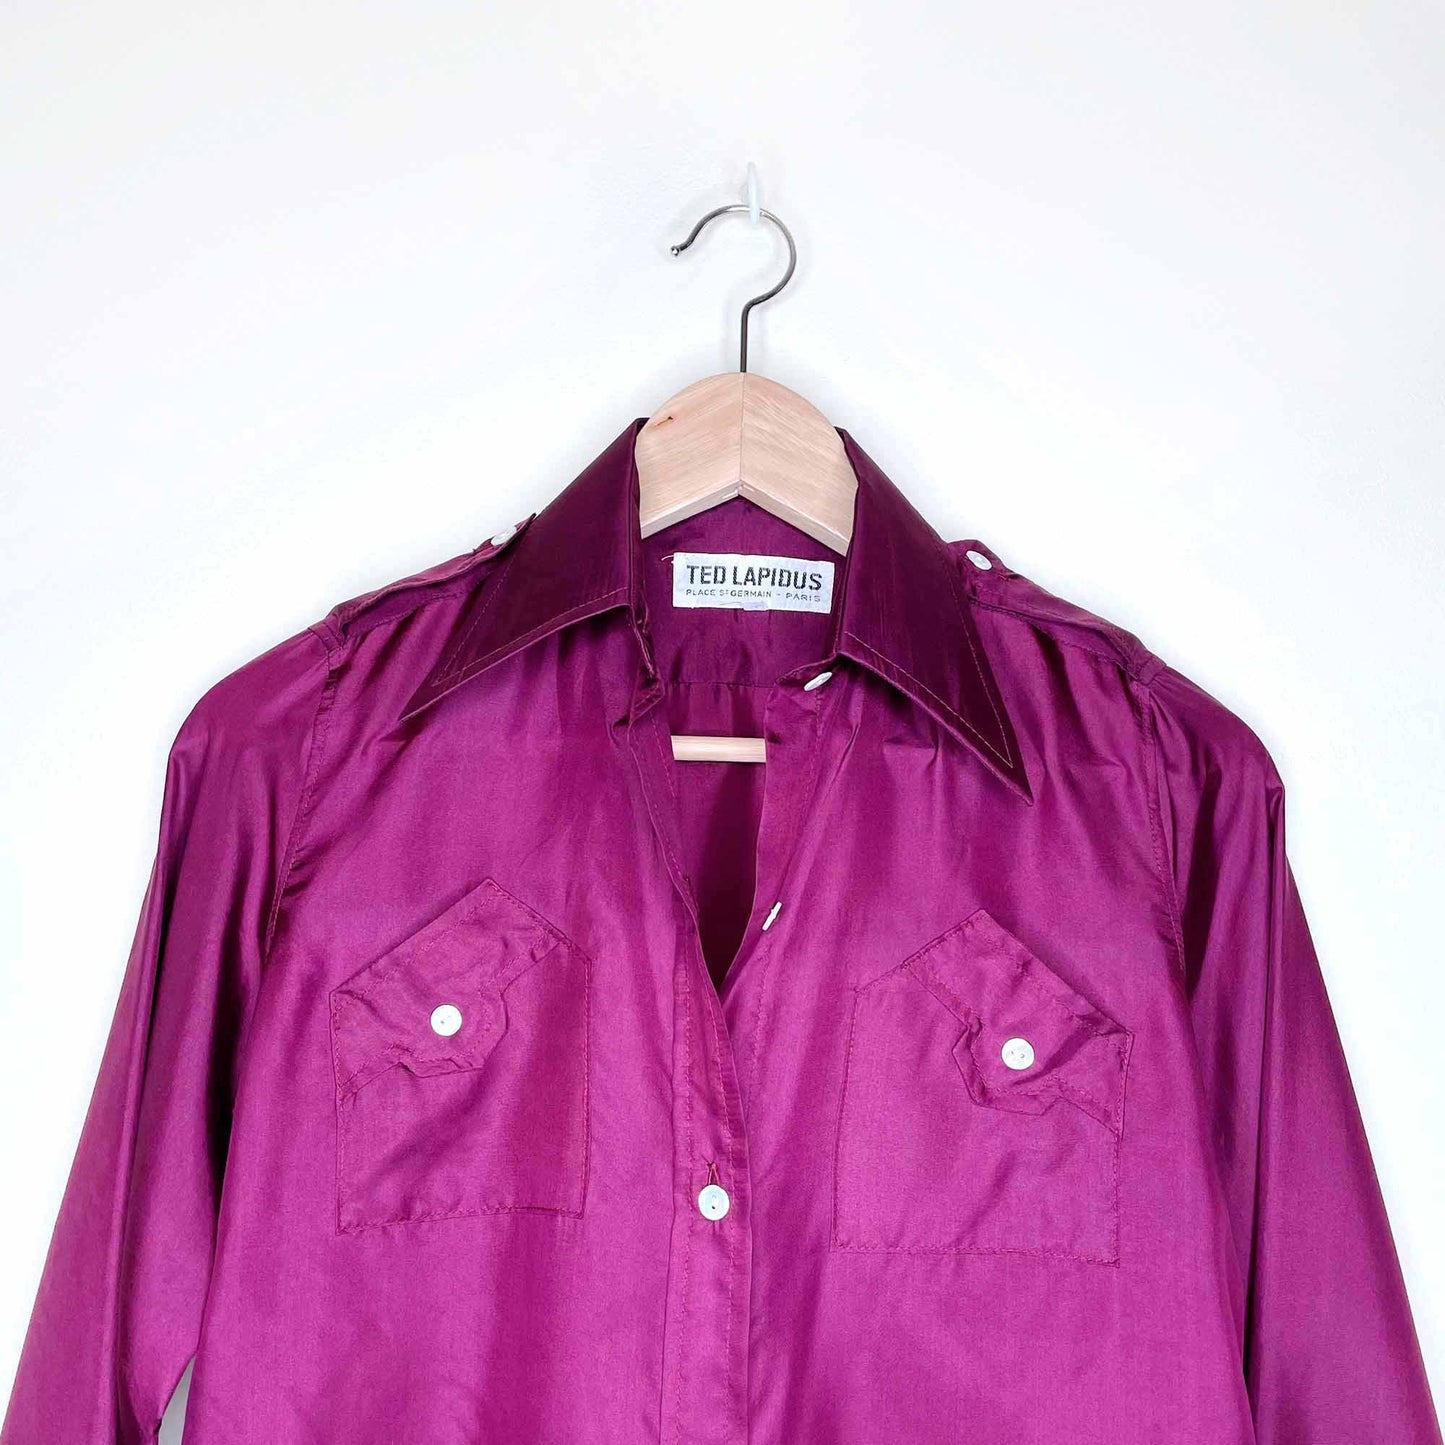 vintage 80's ted lapidus silk western button down shirt - size 40